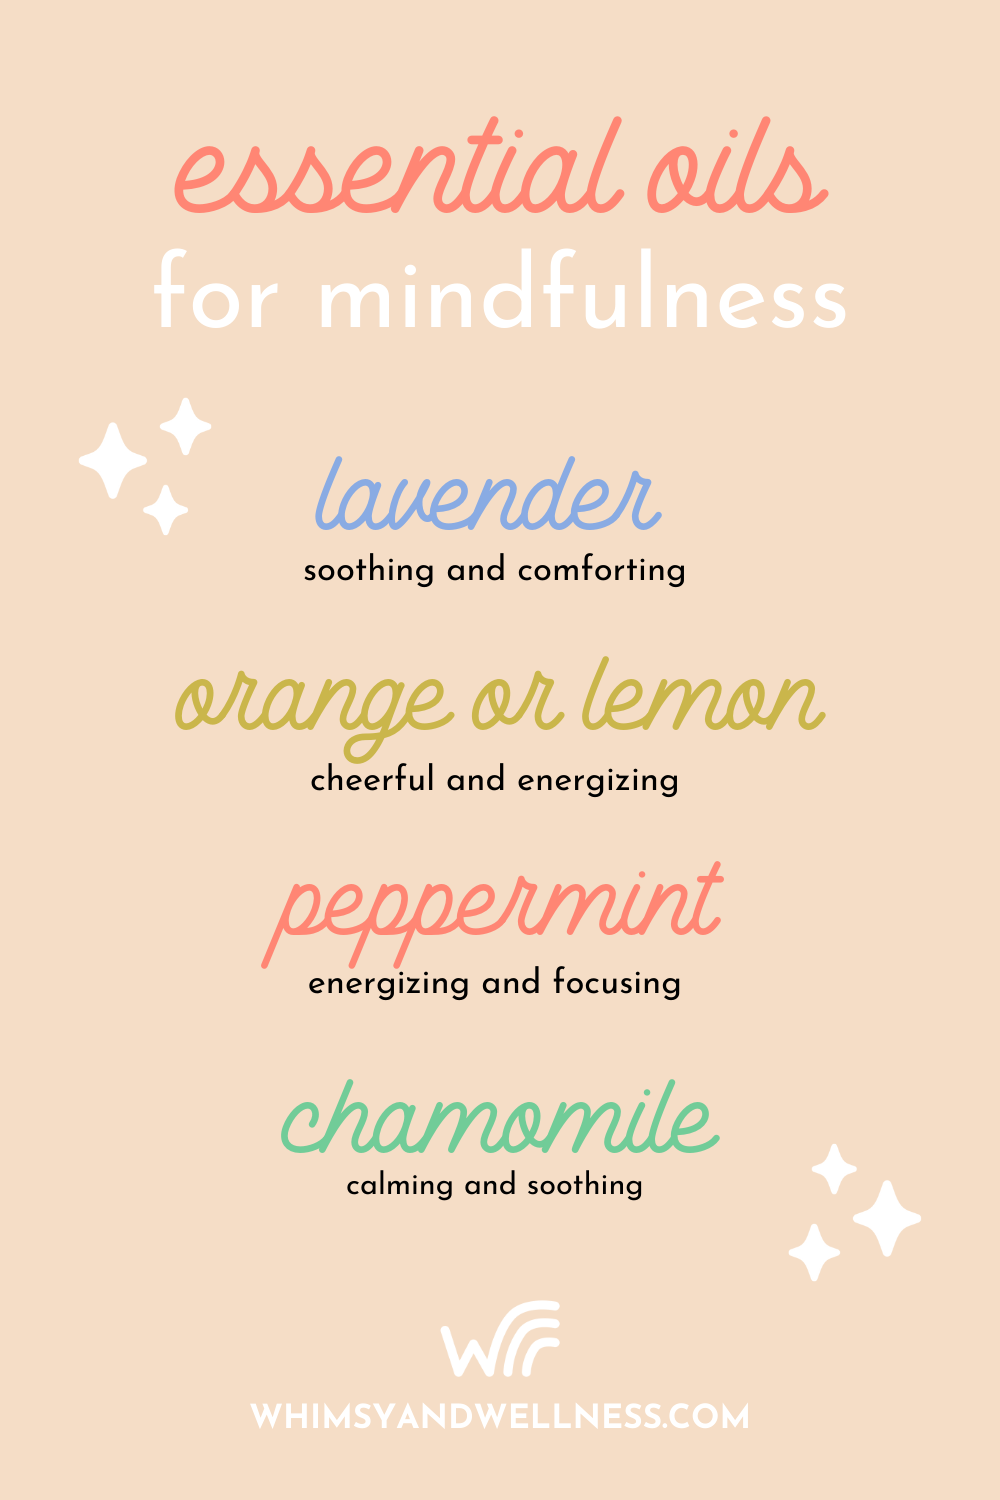 Essential oils for mindfulness